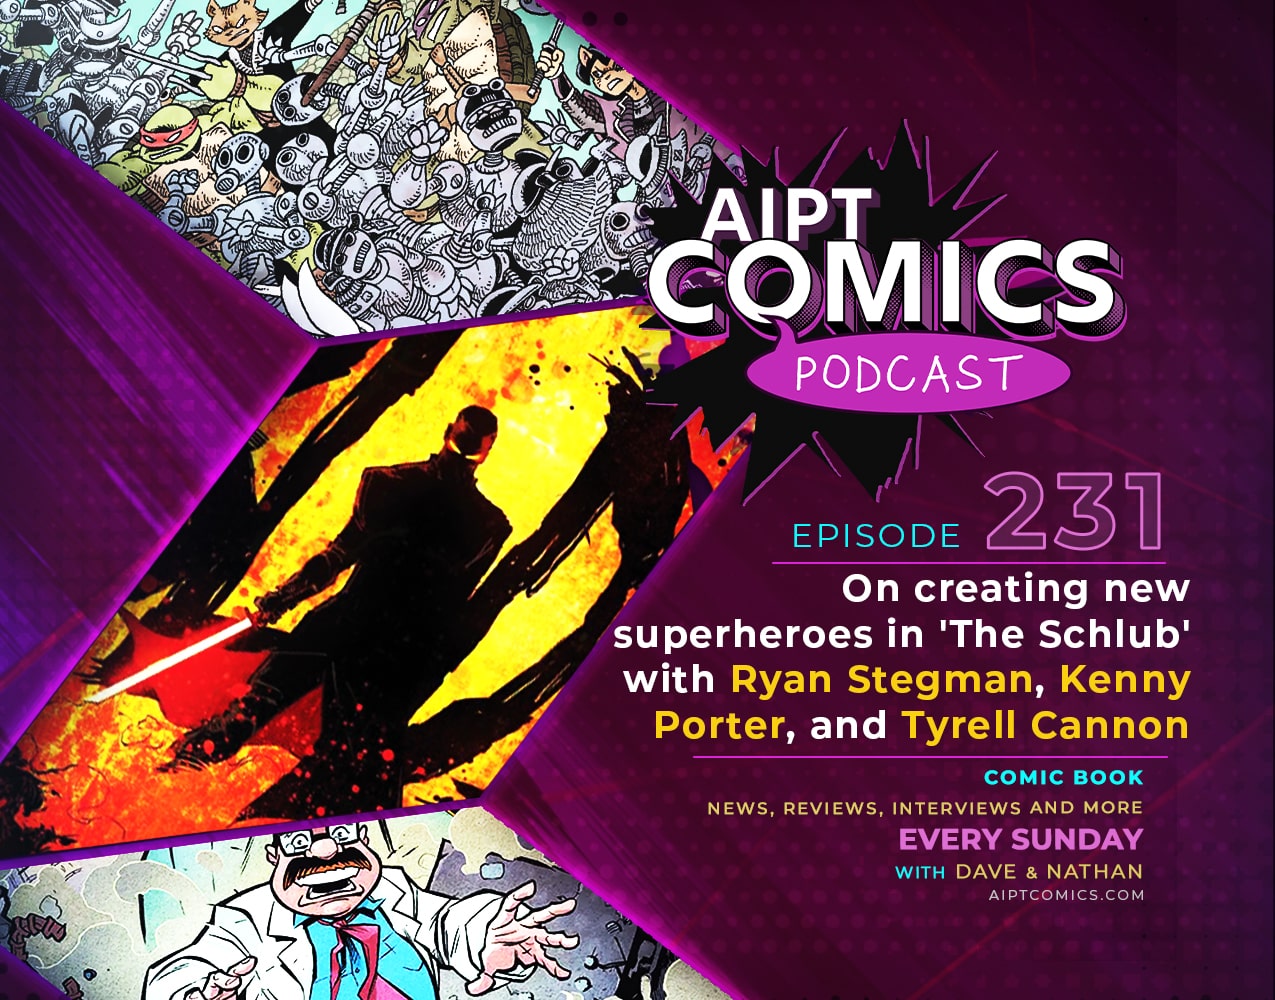 AIPT Comics Podcast episode 231: On creating new superheroes in 'The Schlub' with Ryan Stegman, Kenny Porter, and Tyrell Cannon